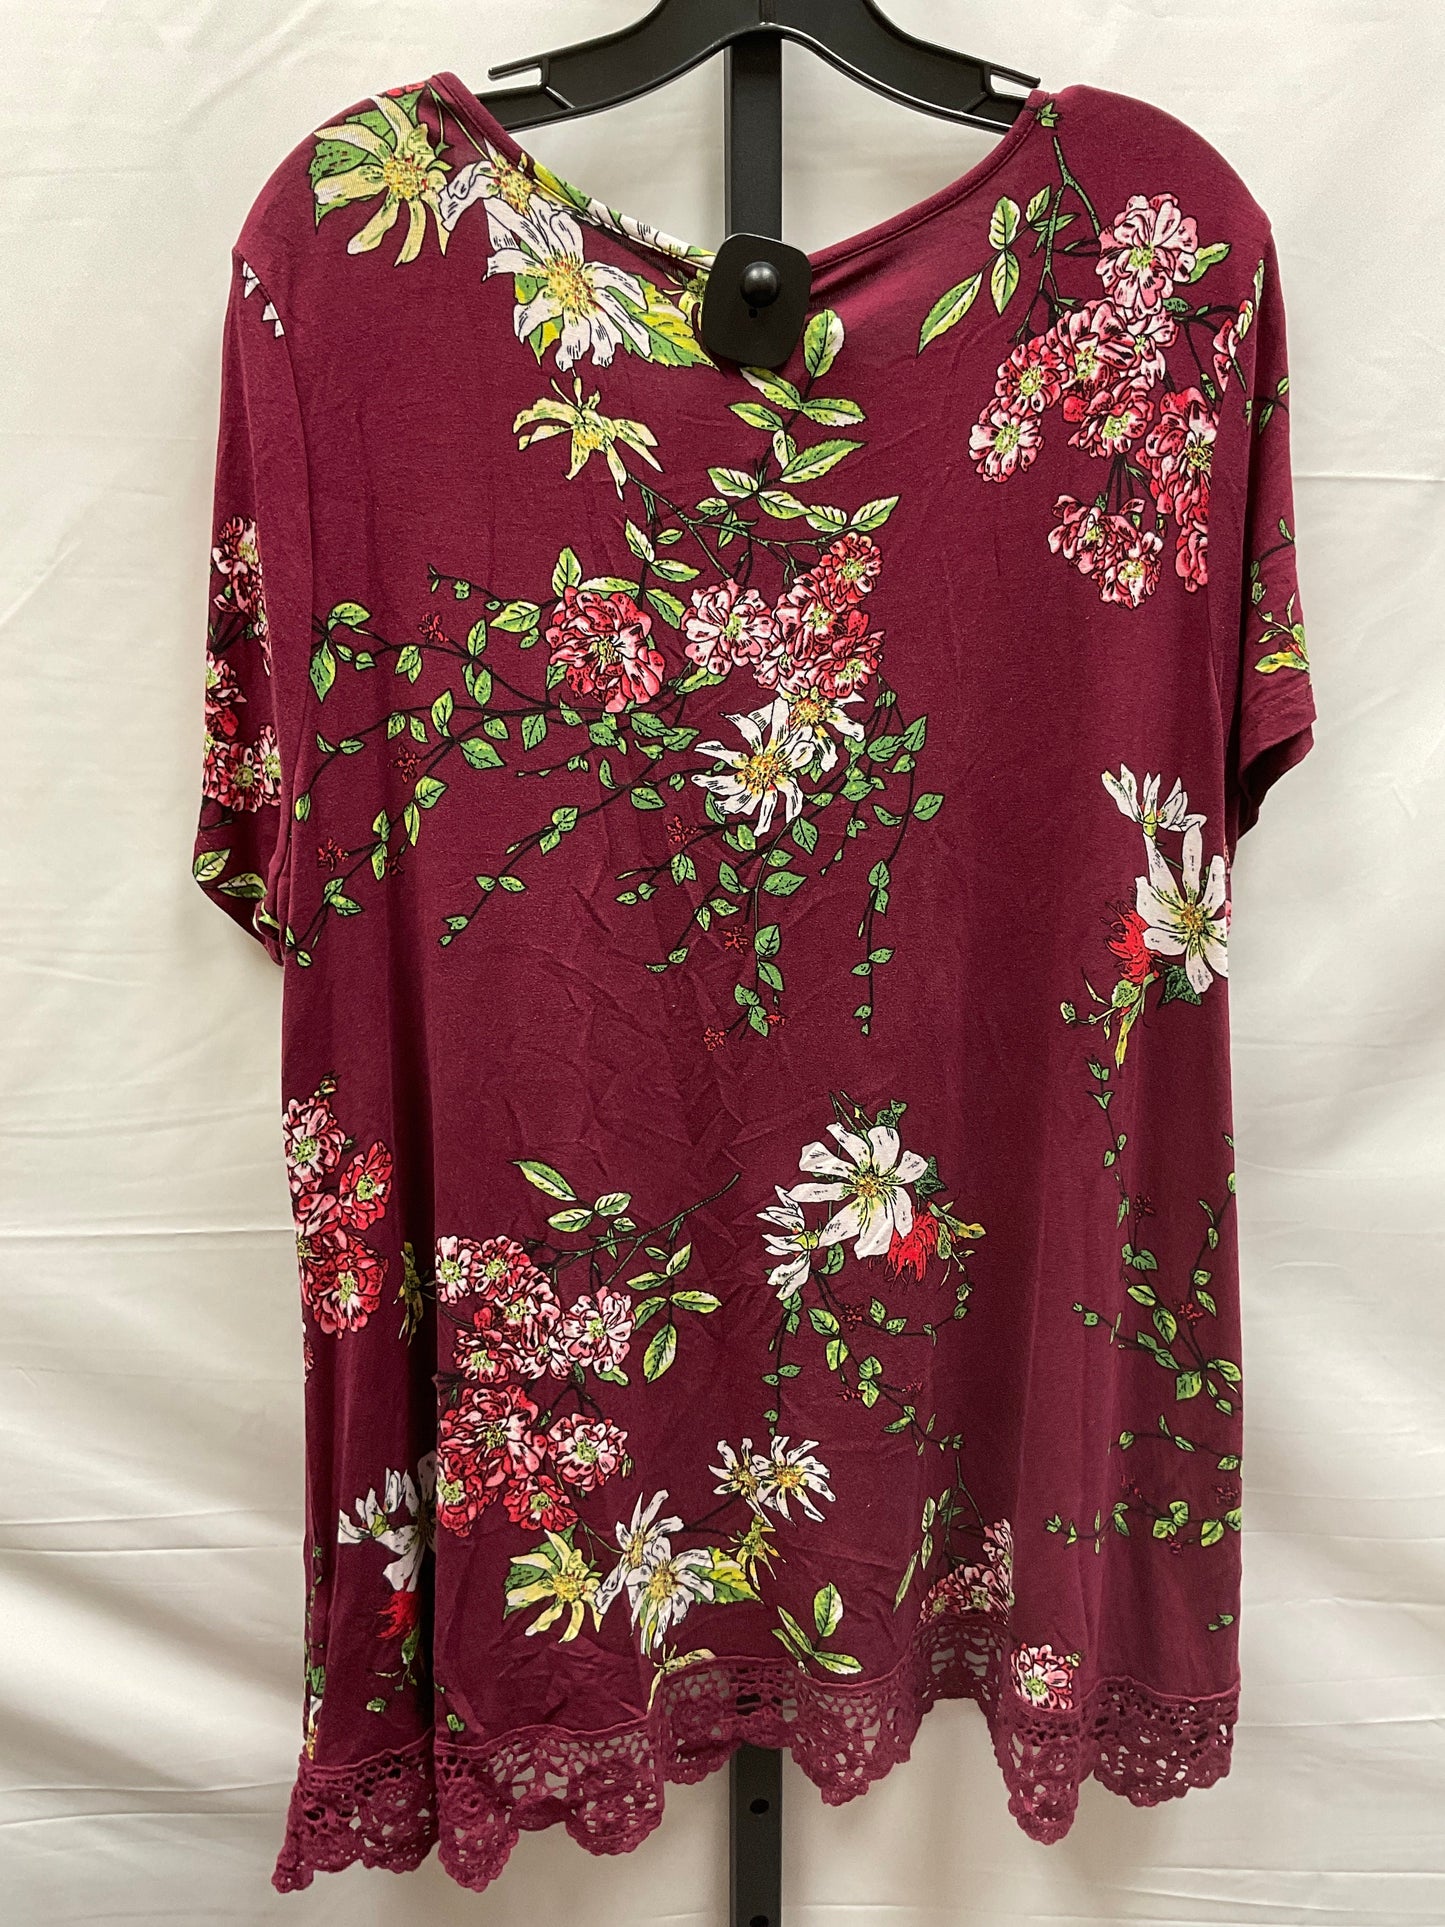 Floral Print Top Short Sleeve Clothes Mentor, Size 2x